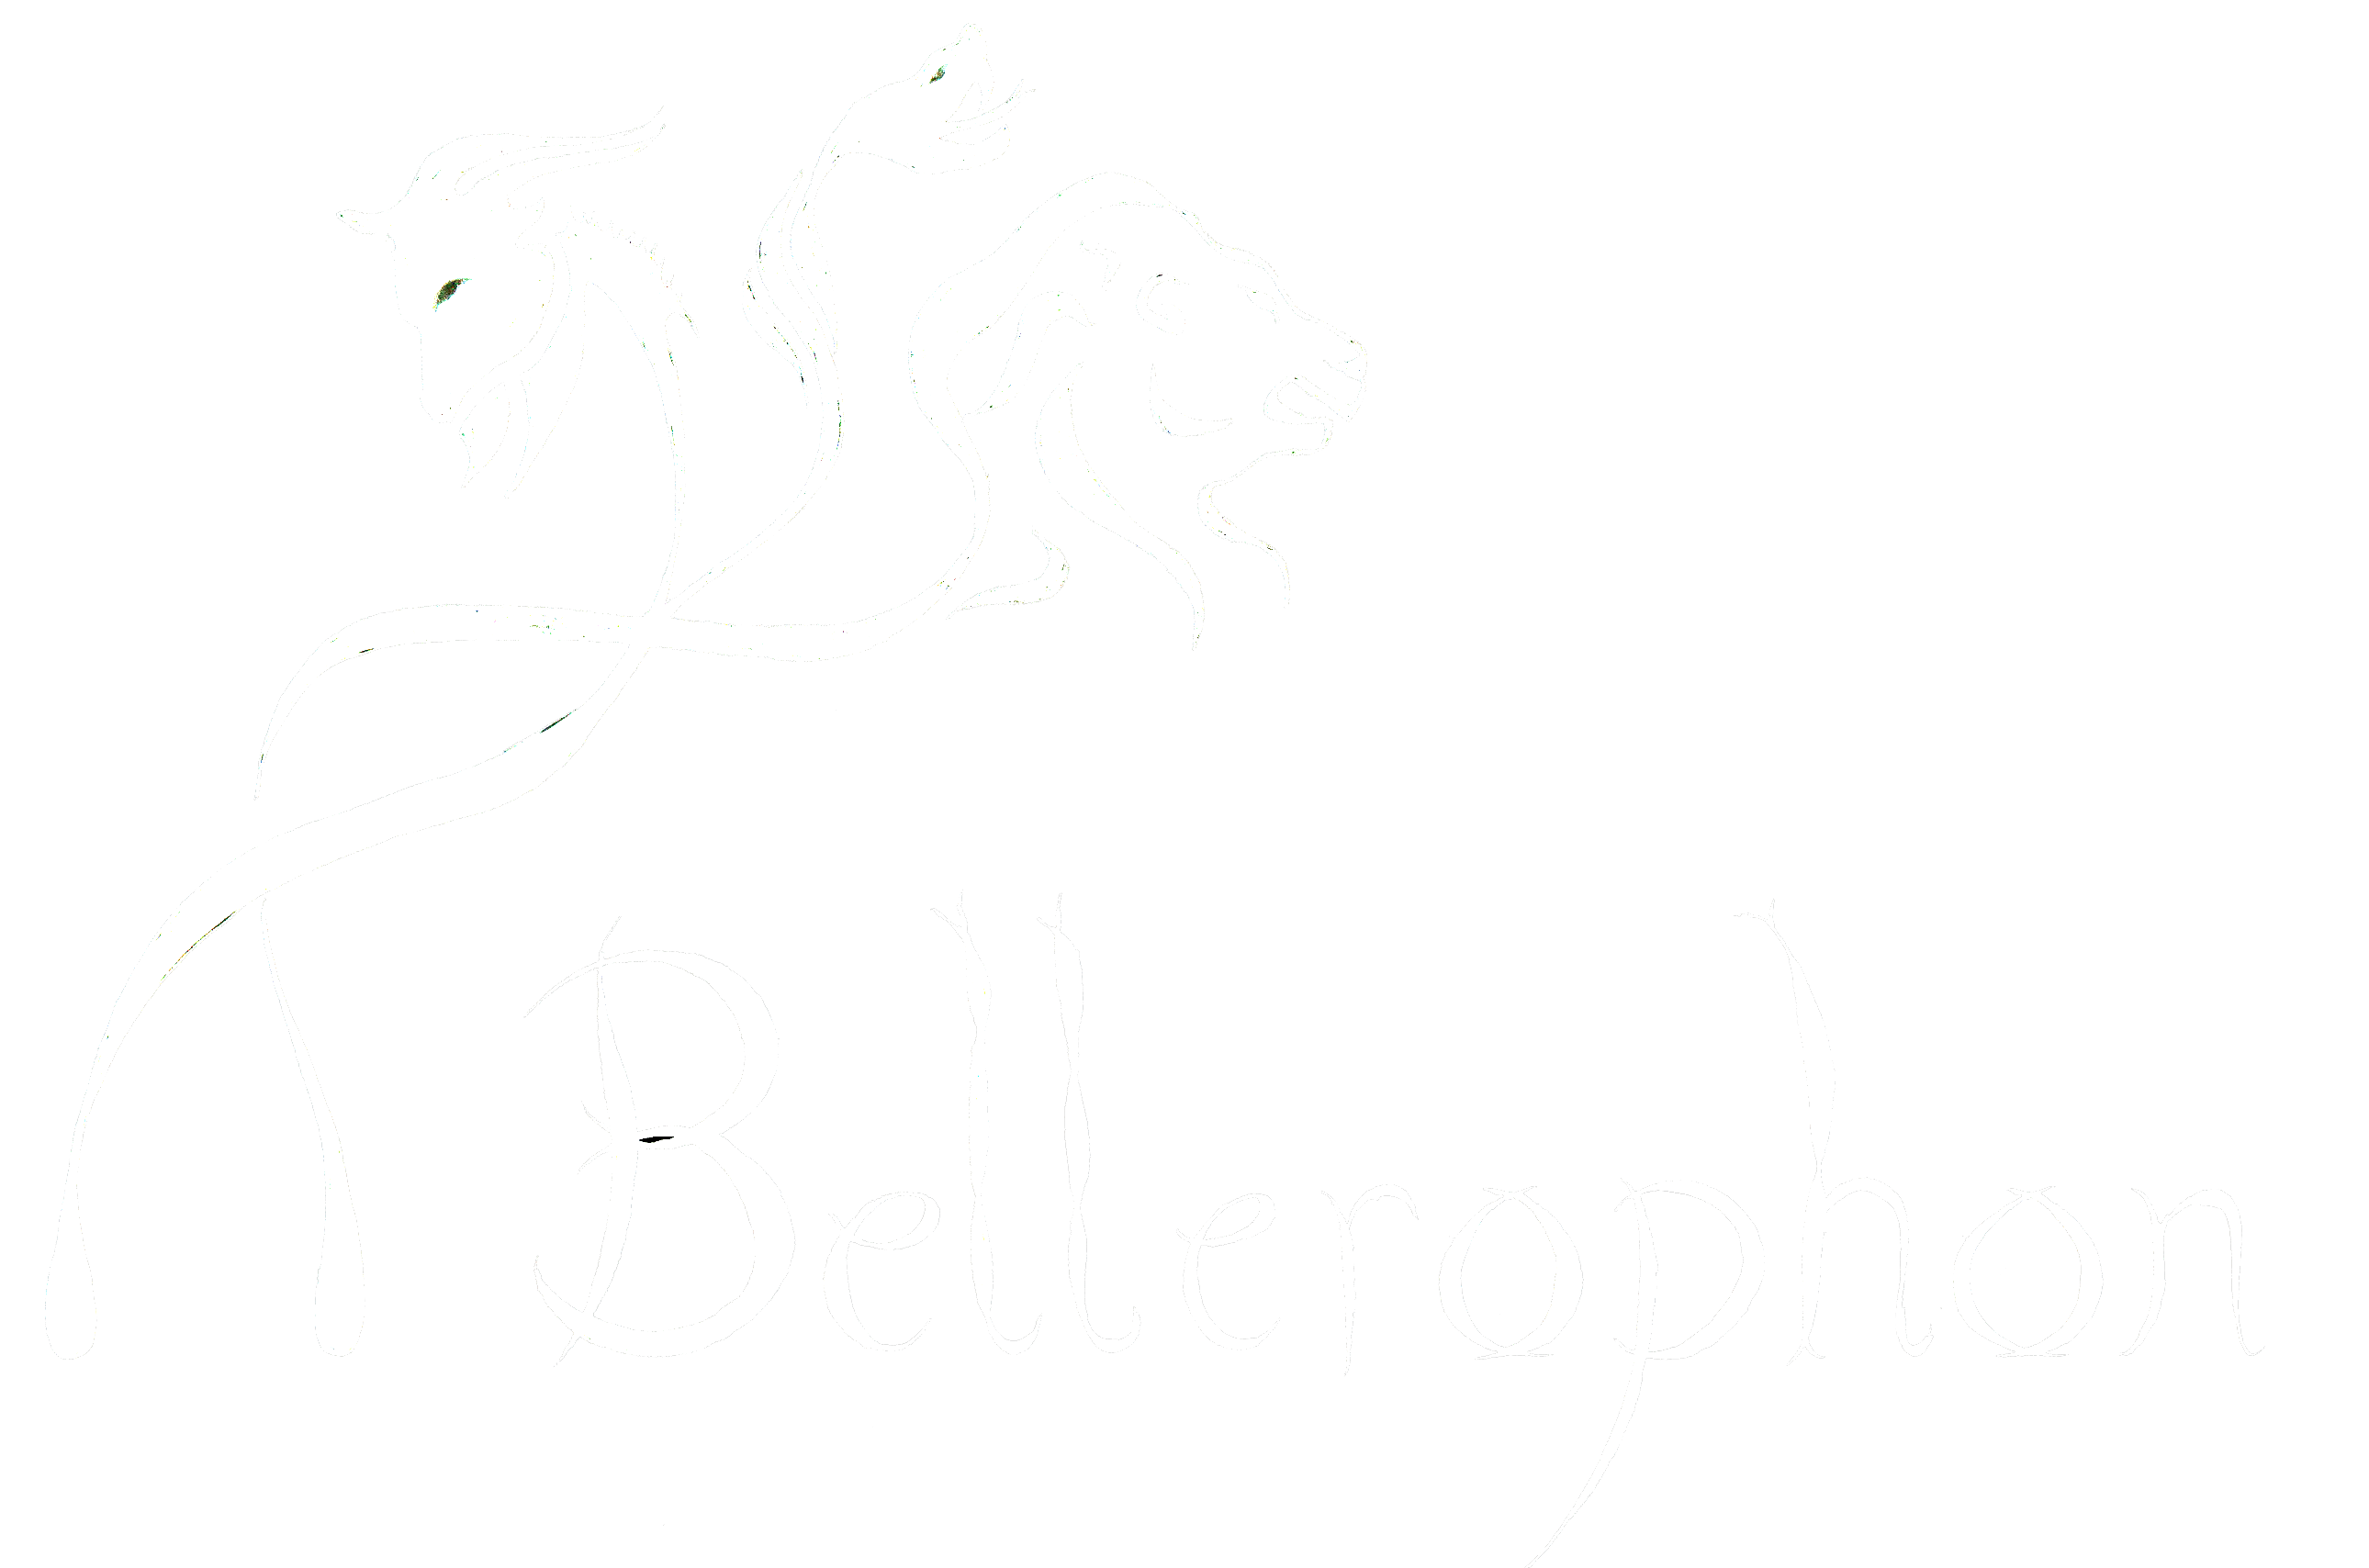 http://openwetware.org/images/e/e4/Bellerophon.png